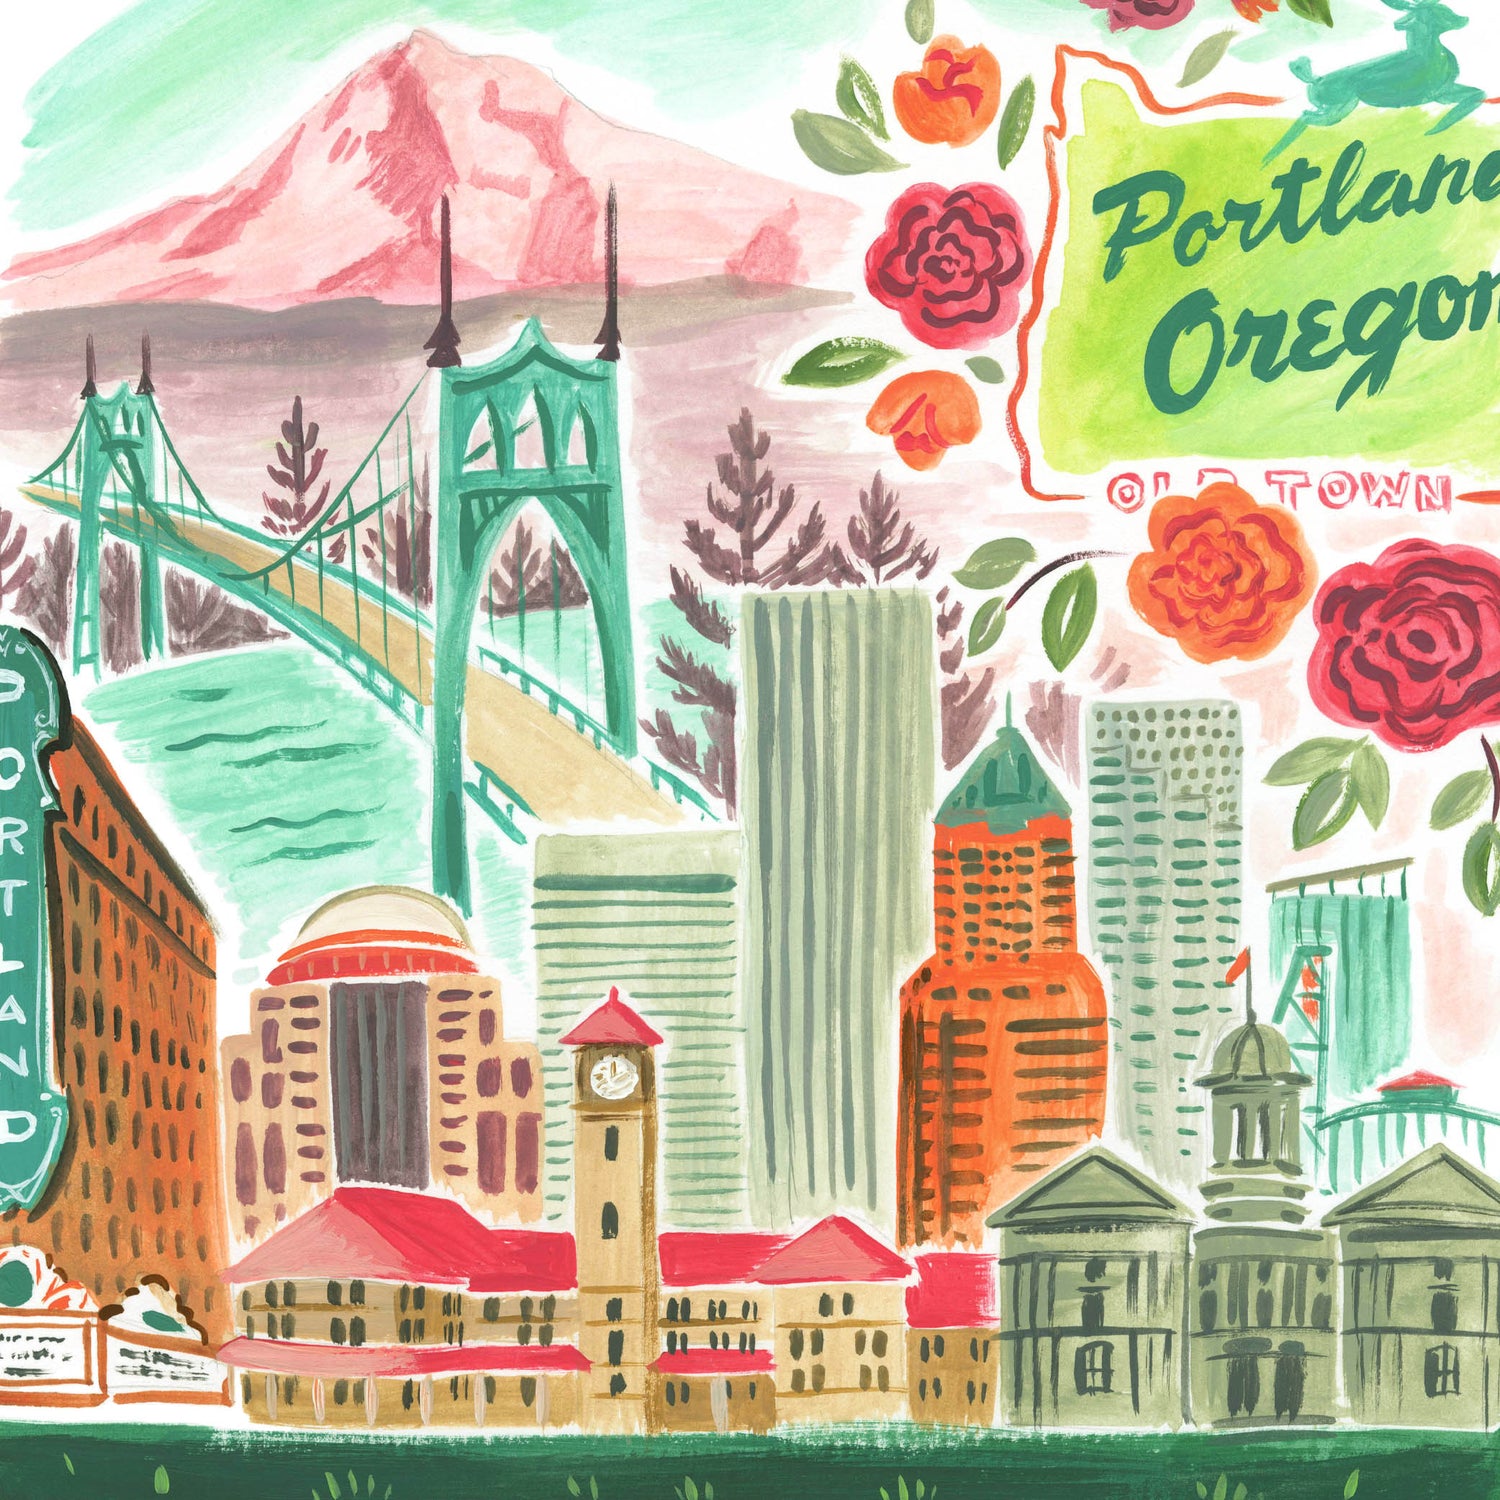 Portland skyline art detail with St. John's Bridge, downtown, and famous Portland signs; trendy illustration by Angela Staehling